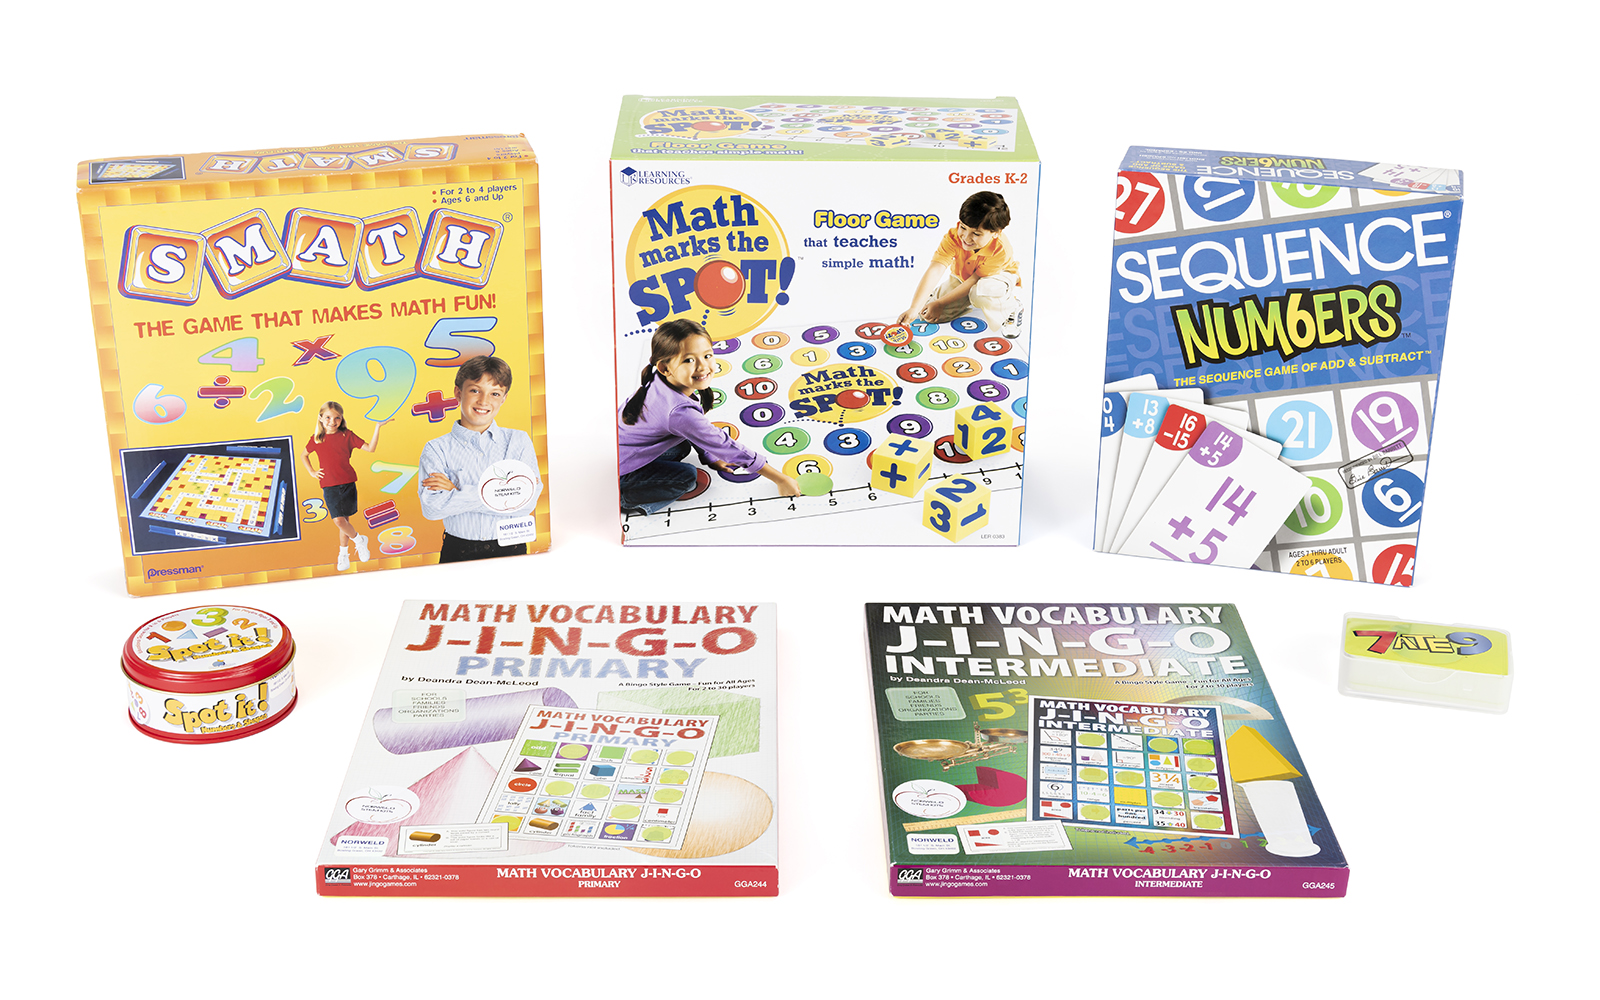 Fun With Math STEM Kit contents